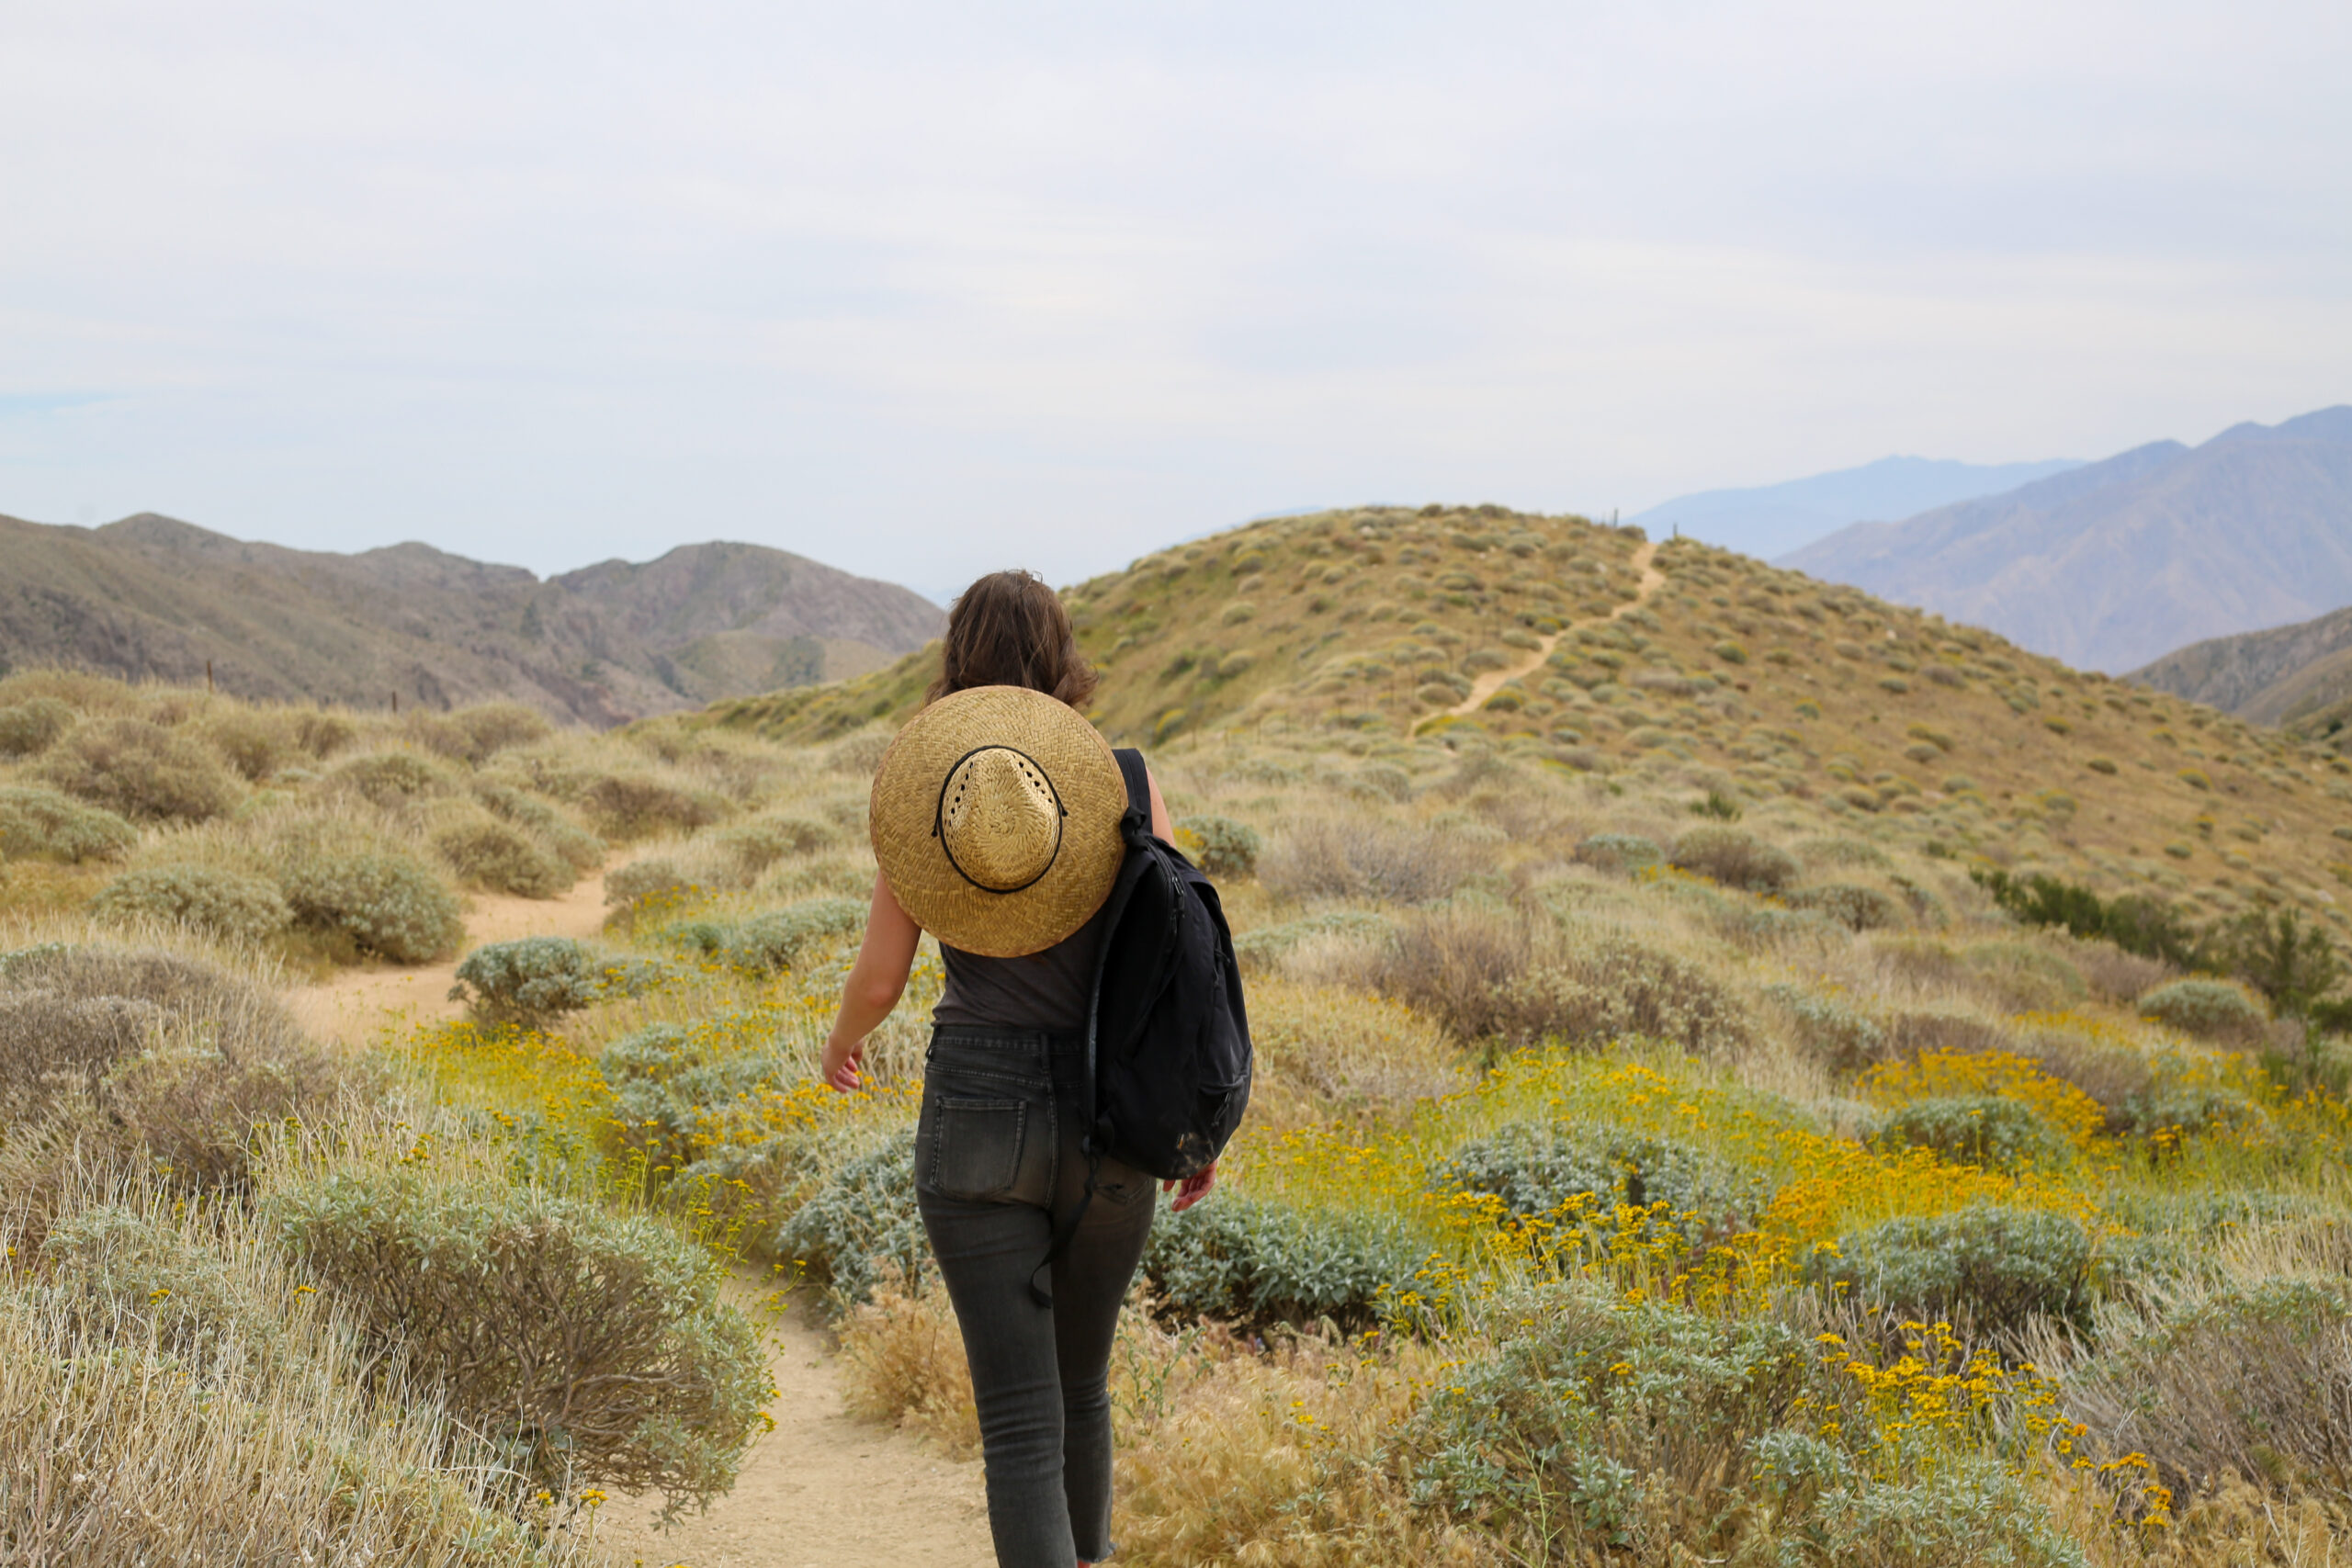 A solo hiker on a desert trail with yellow spring blooms near Palm Springs, California.